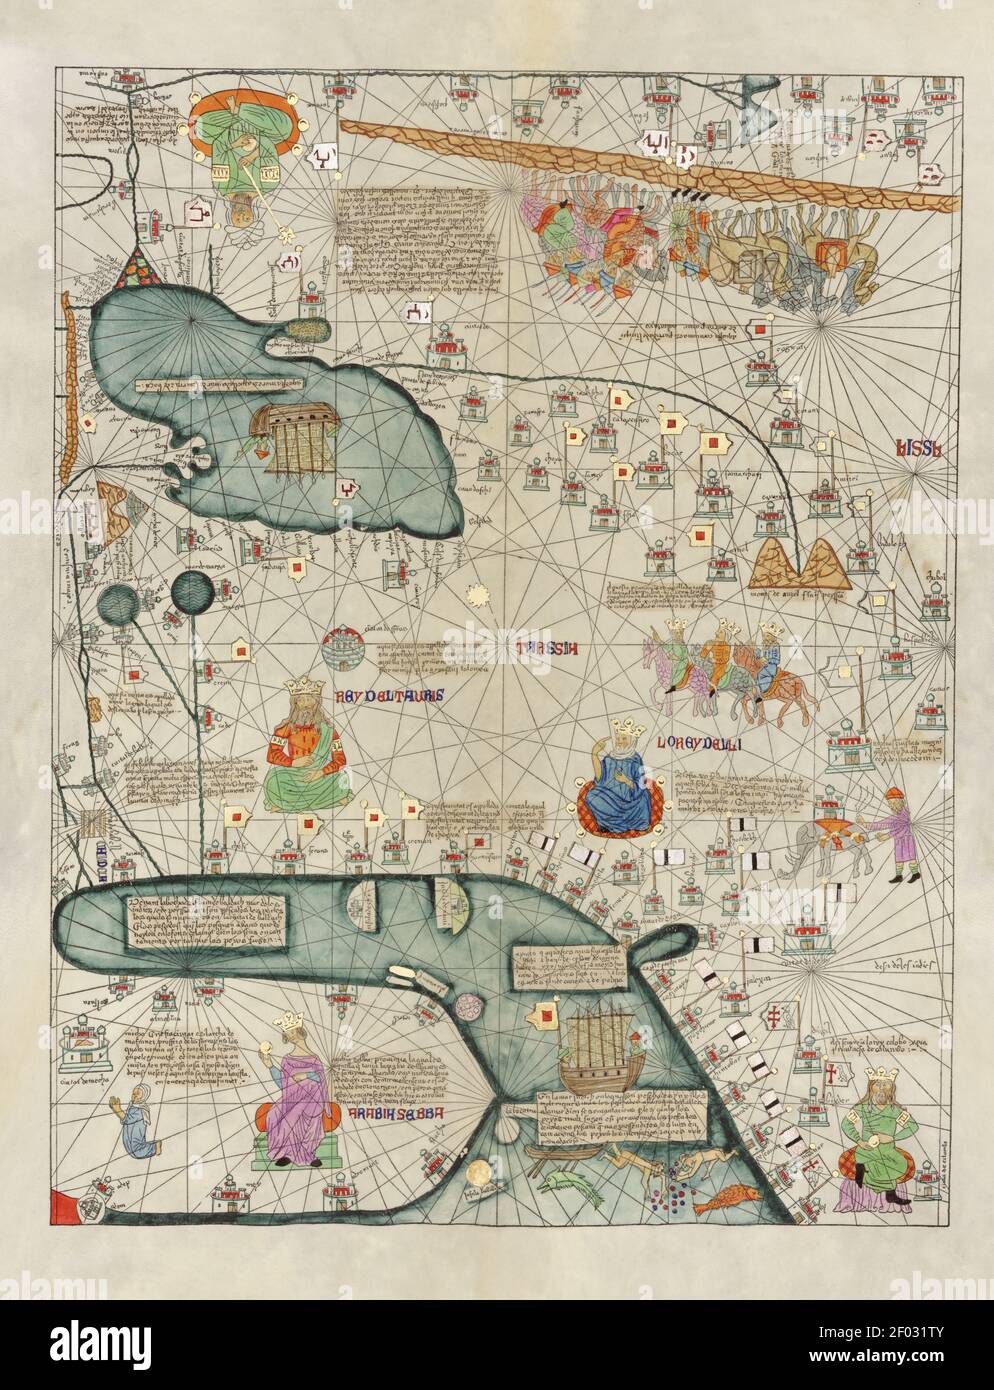 Taken from an ancient Spanish Atlas. Full of details. Very high resolution. Stock Photo